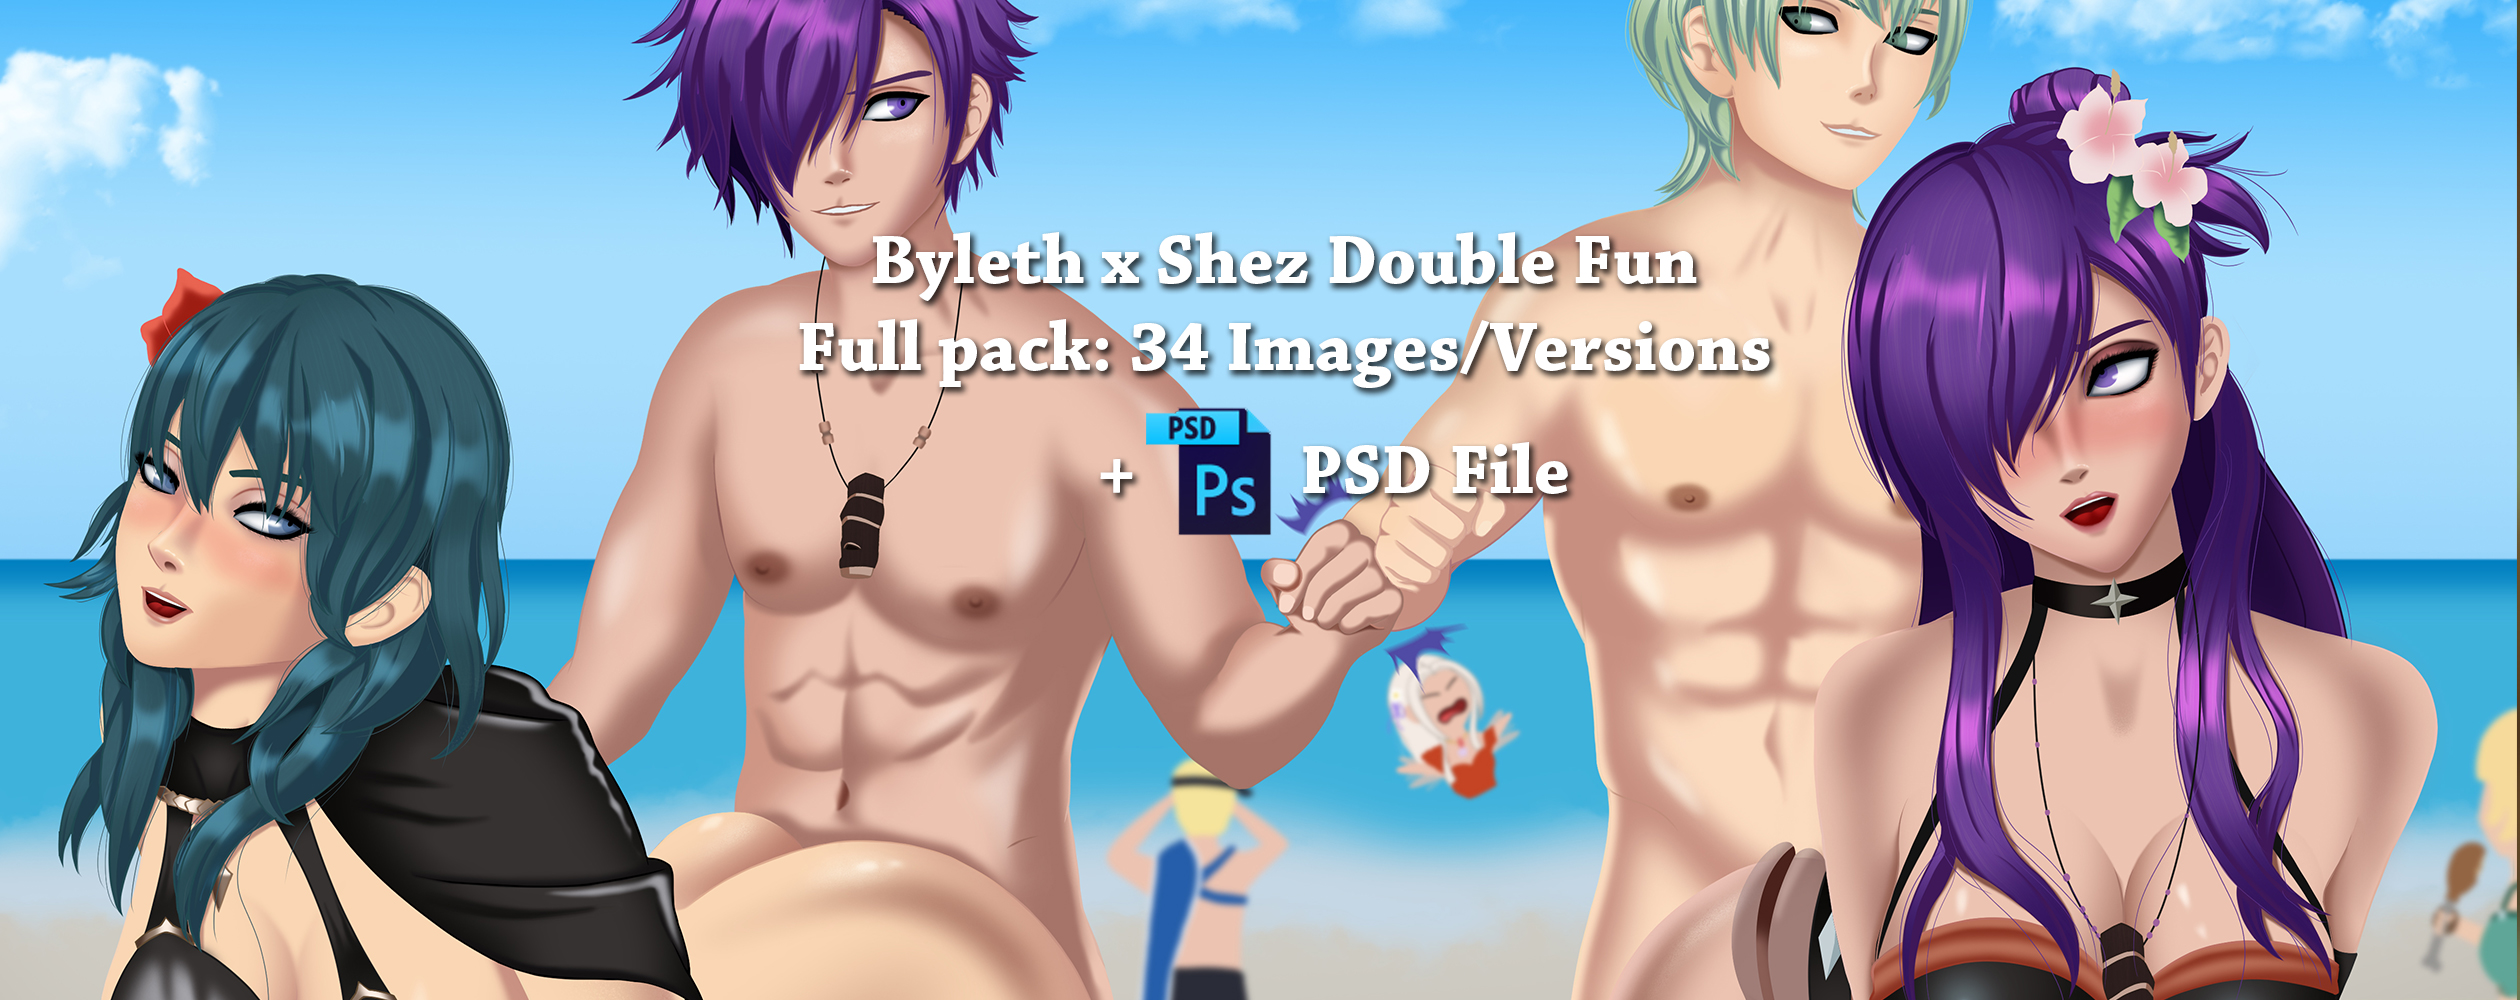 Byleth x Shez Double Fun + Summer ver